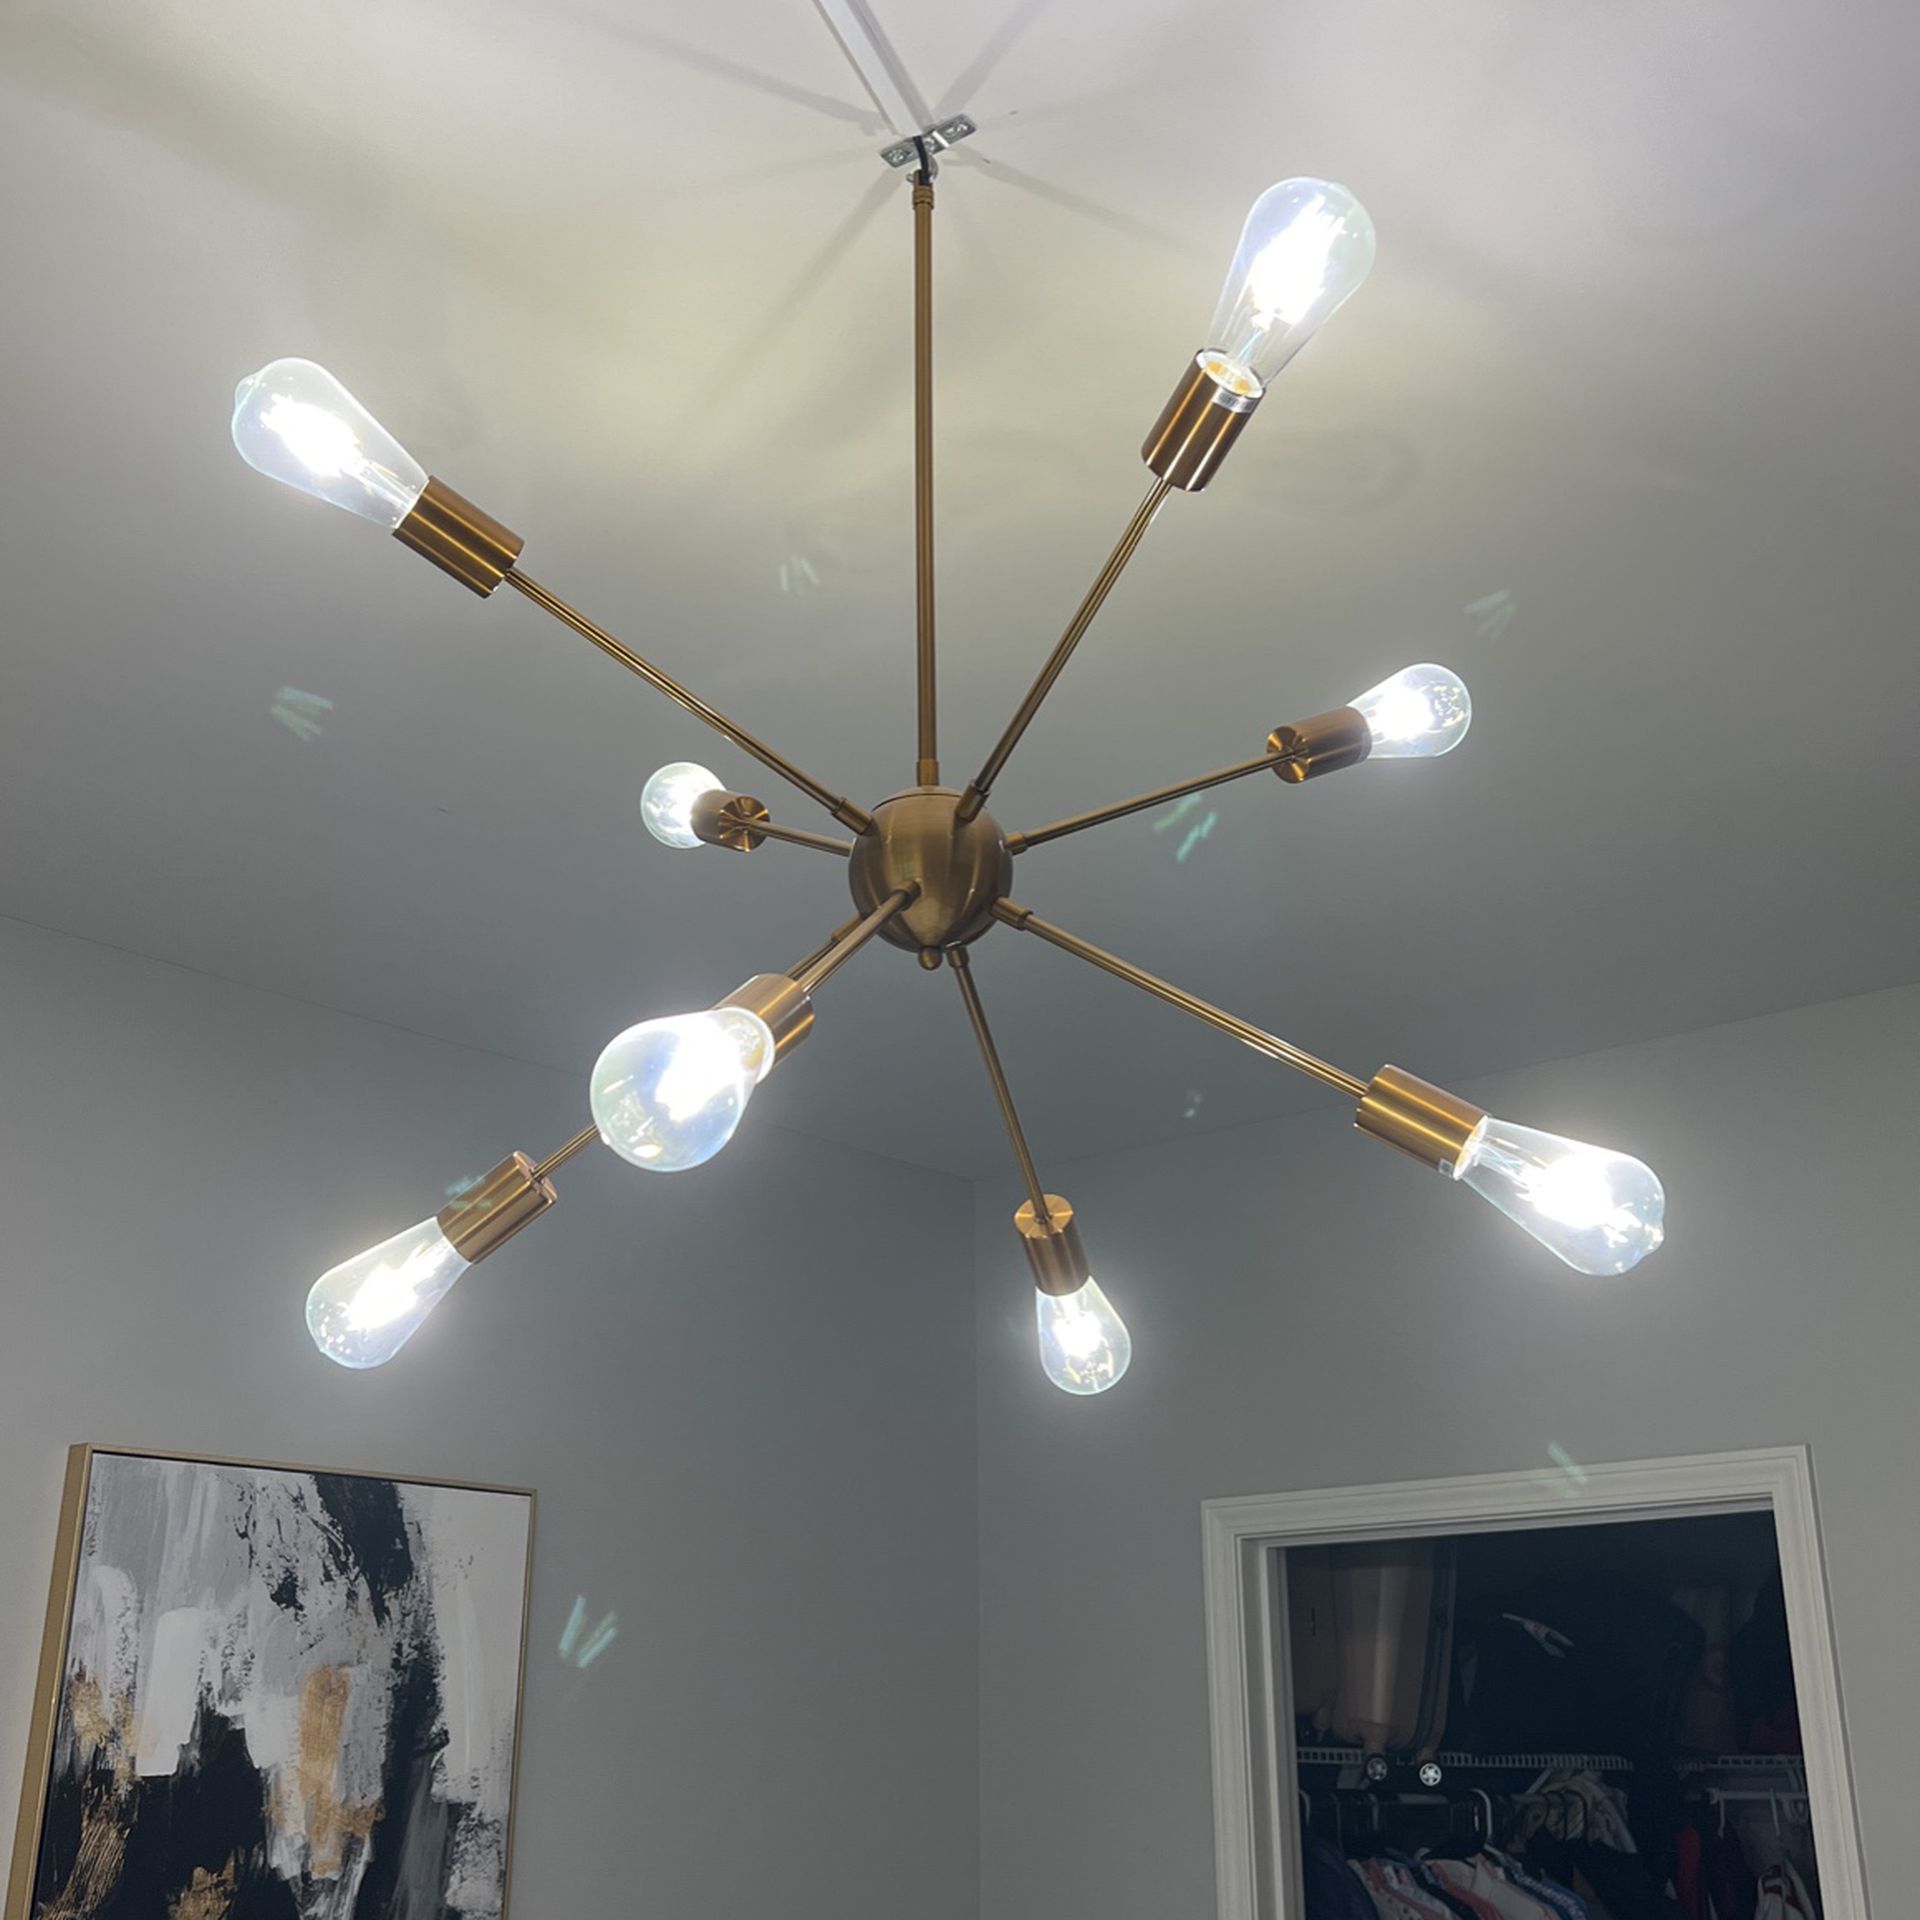 Plug in light Fixture for Sale in Rochester, NY - OfferUp